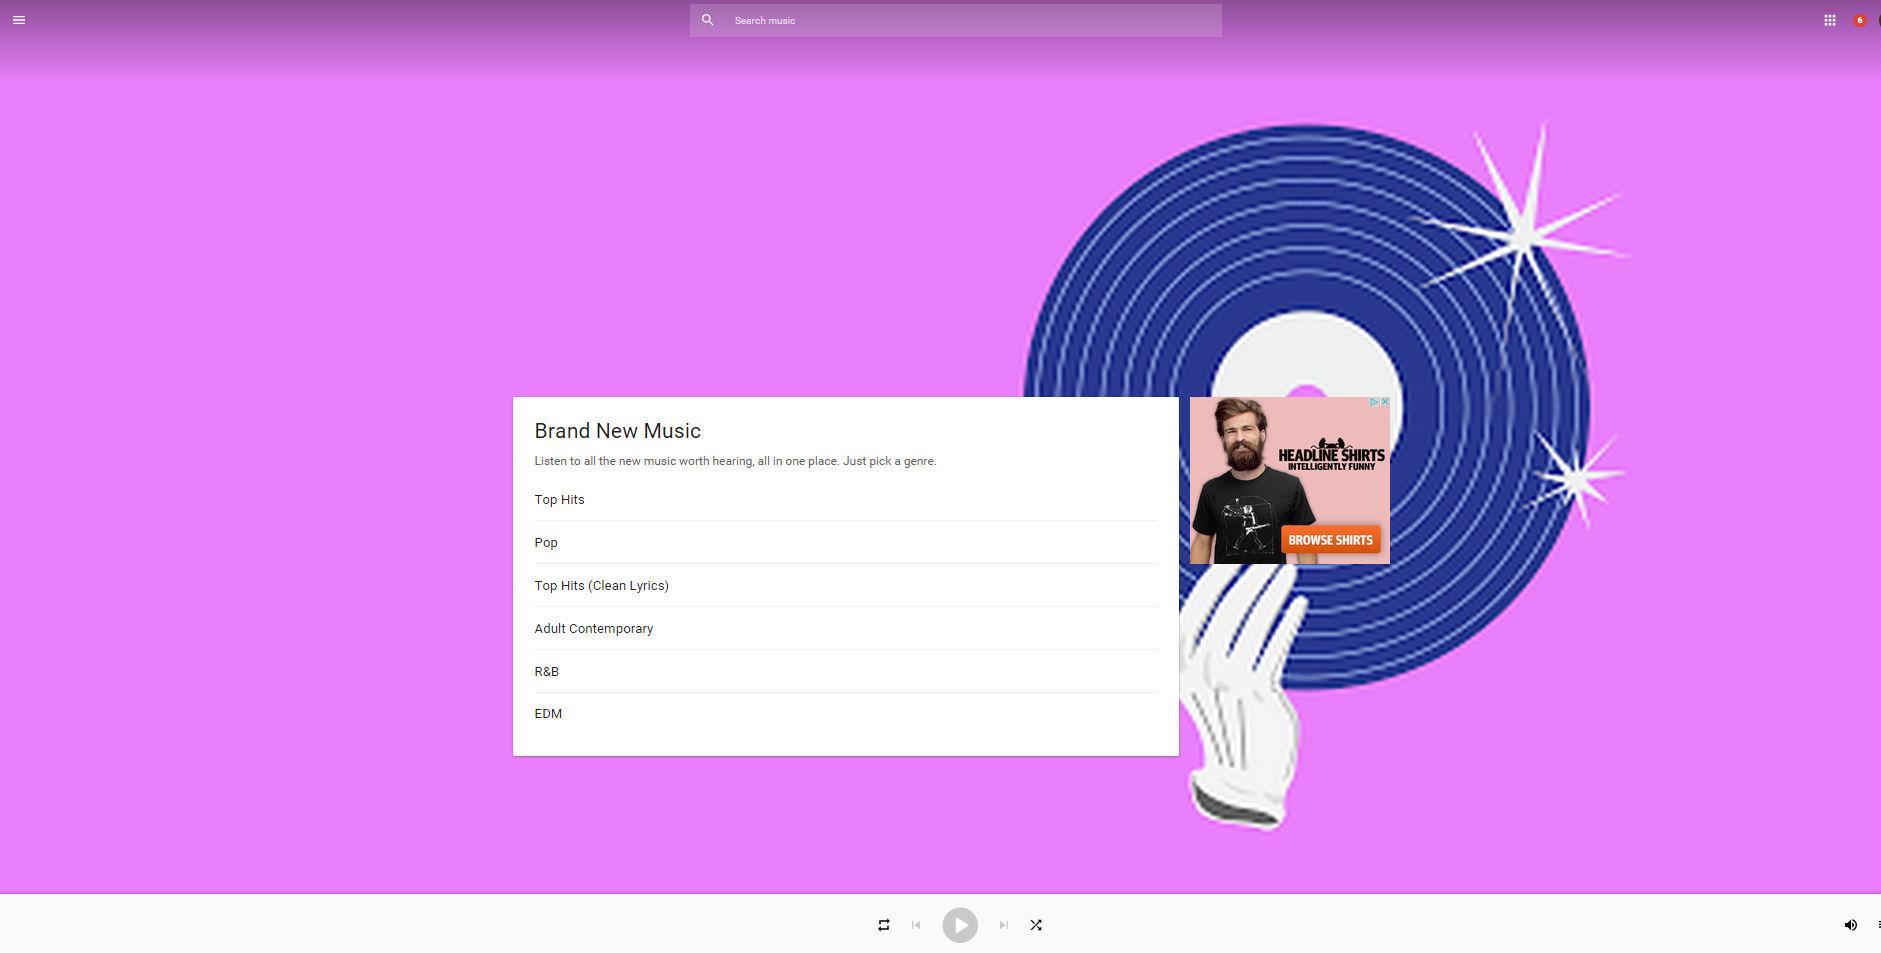 google music announces free ad supported tier play brand new